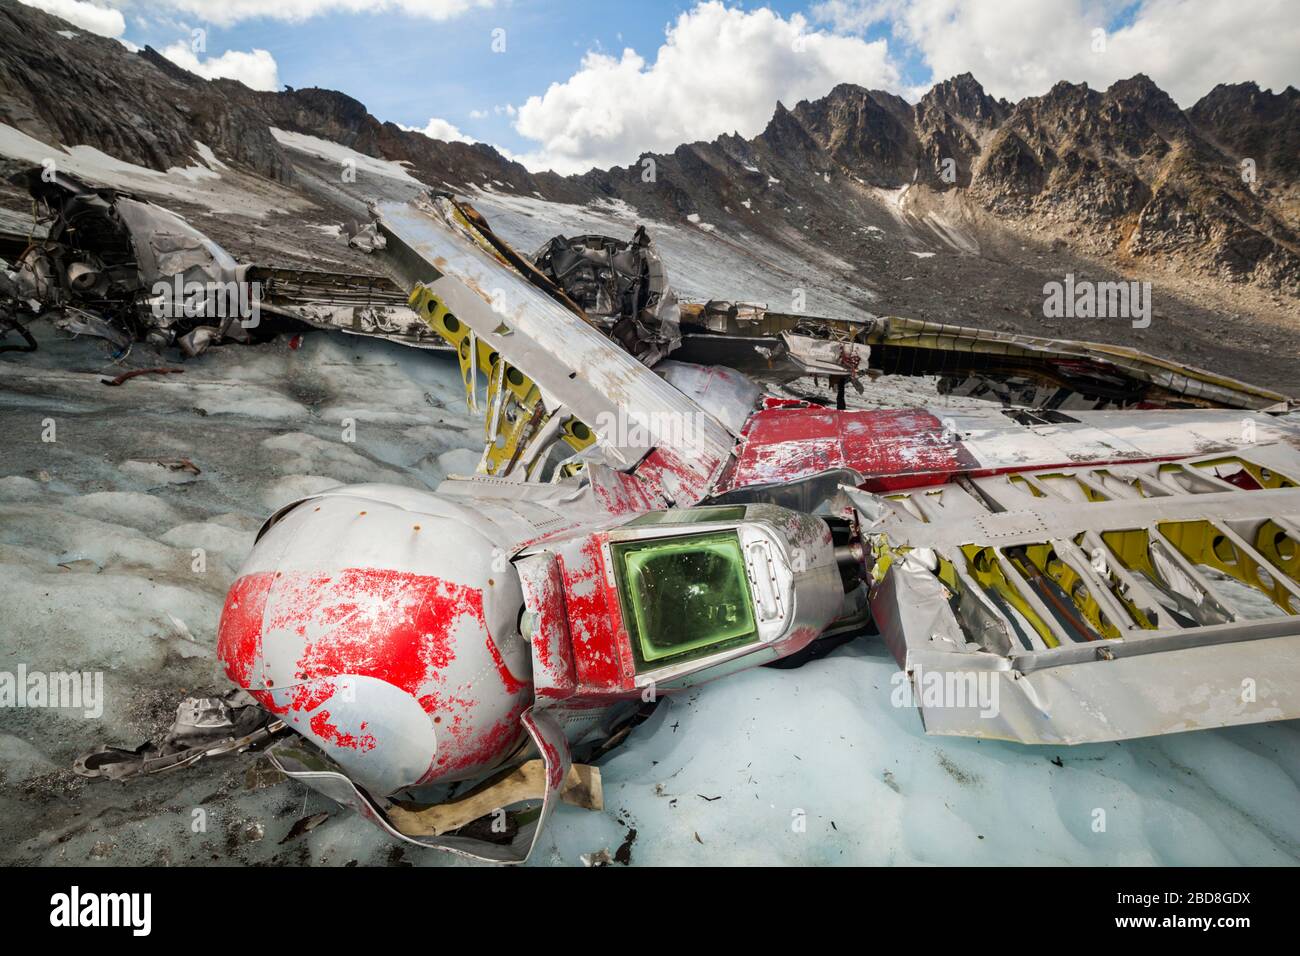 The wreck of a military airplane on Bomber Glacier, Talkeetna Mountains, Alaska. A TB-29 Superfortress (trainer B-29 bomber) crashed here in 1957 duri Stock Photo